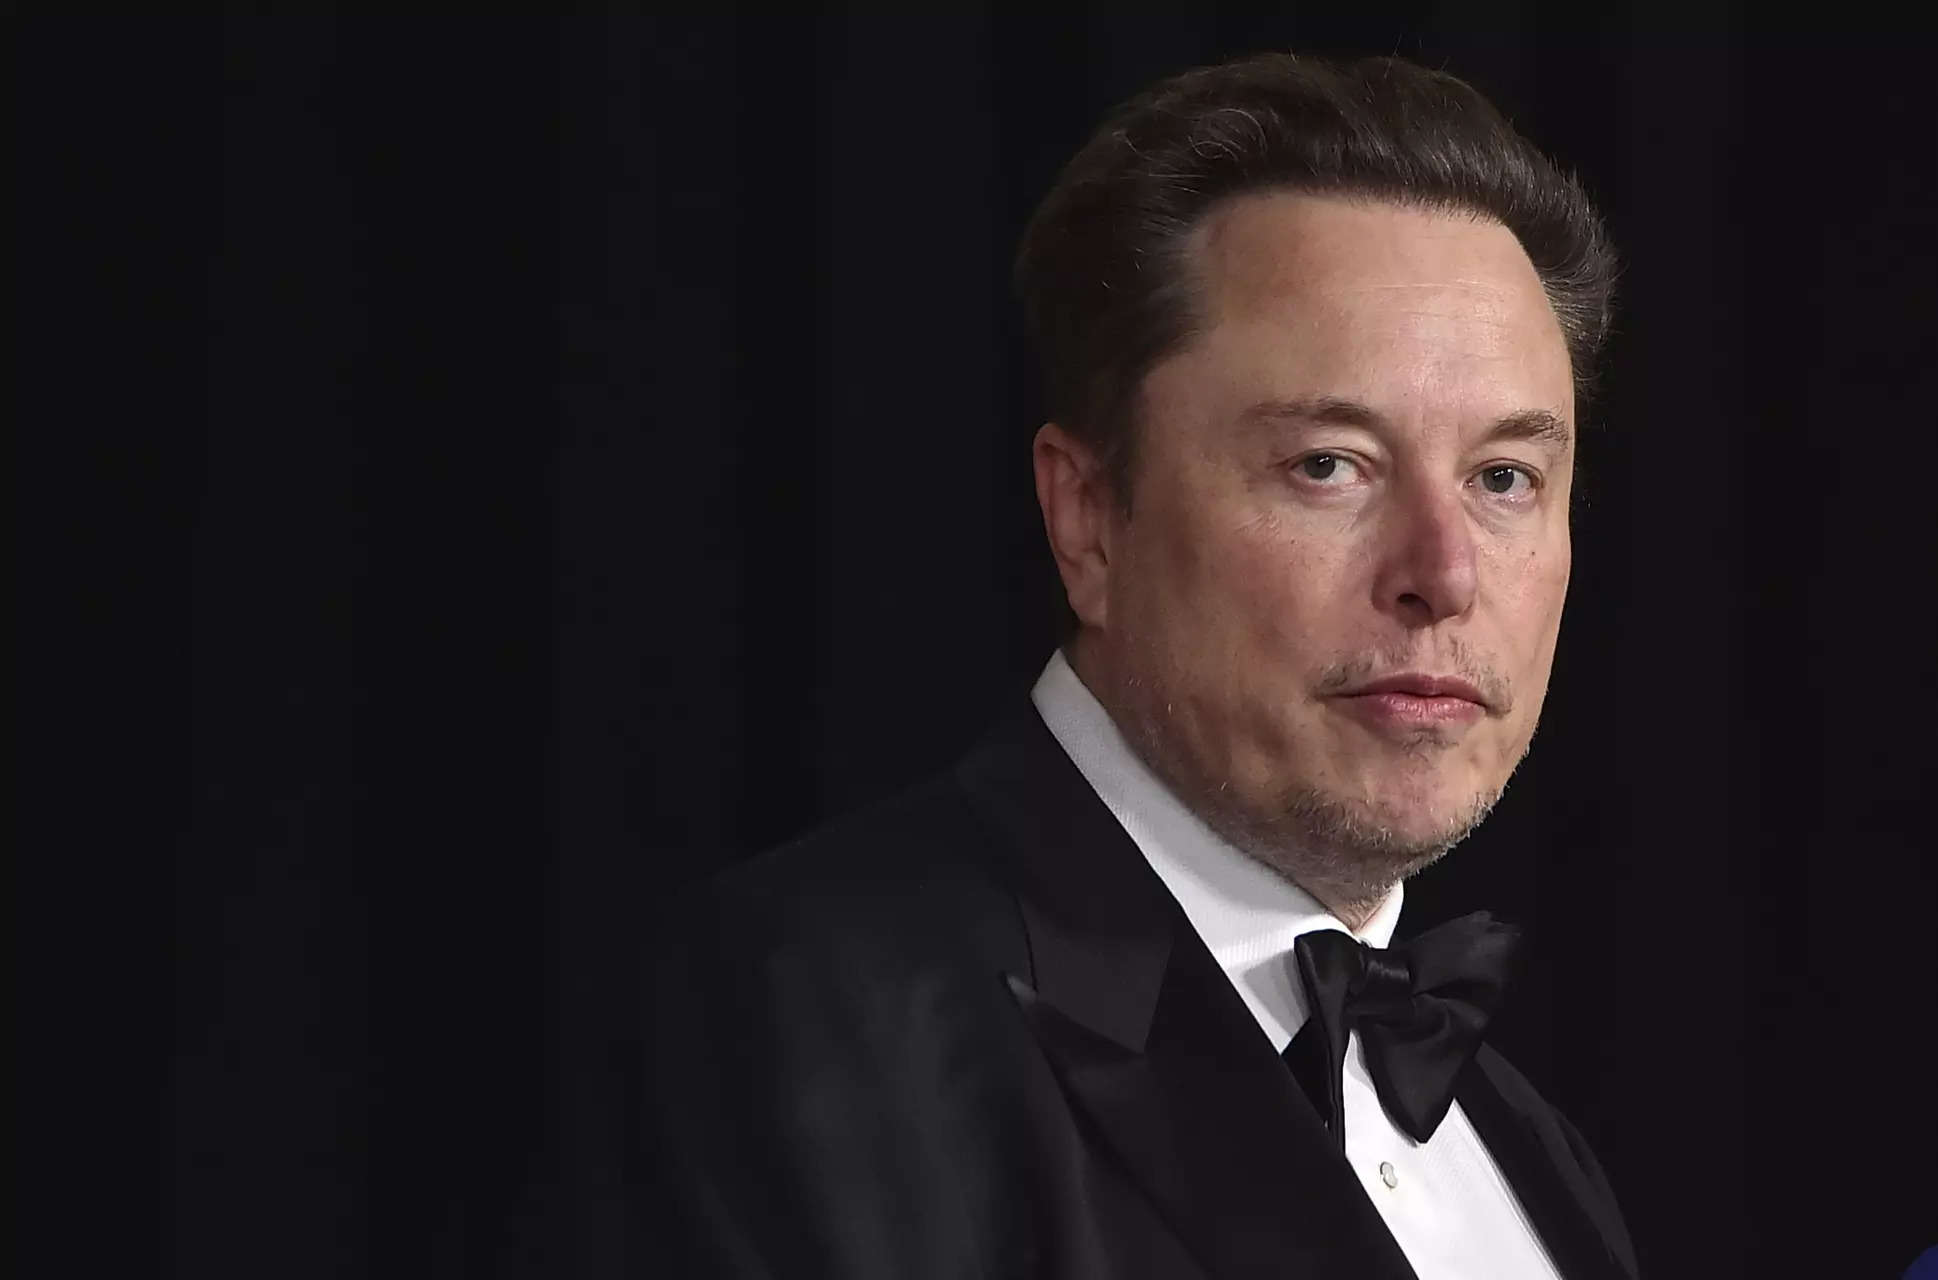 Tesla investors to urge judge to reject record $7 billion legal fee in Elon Musk pay case 